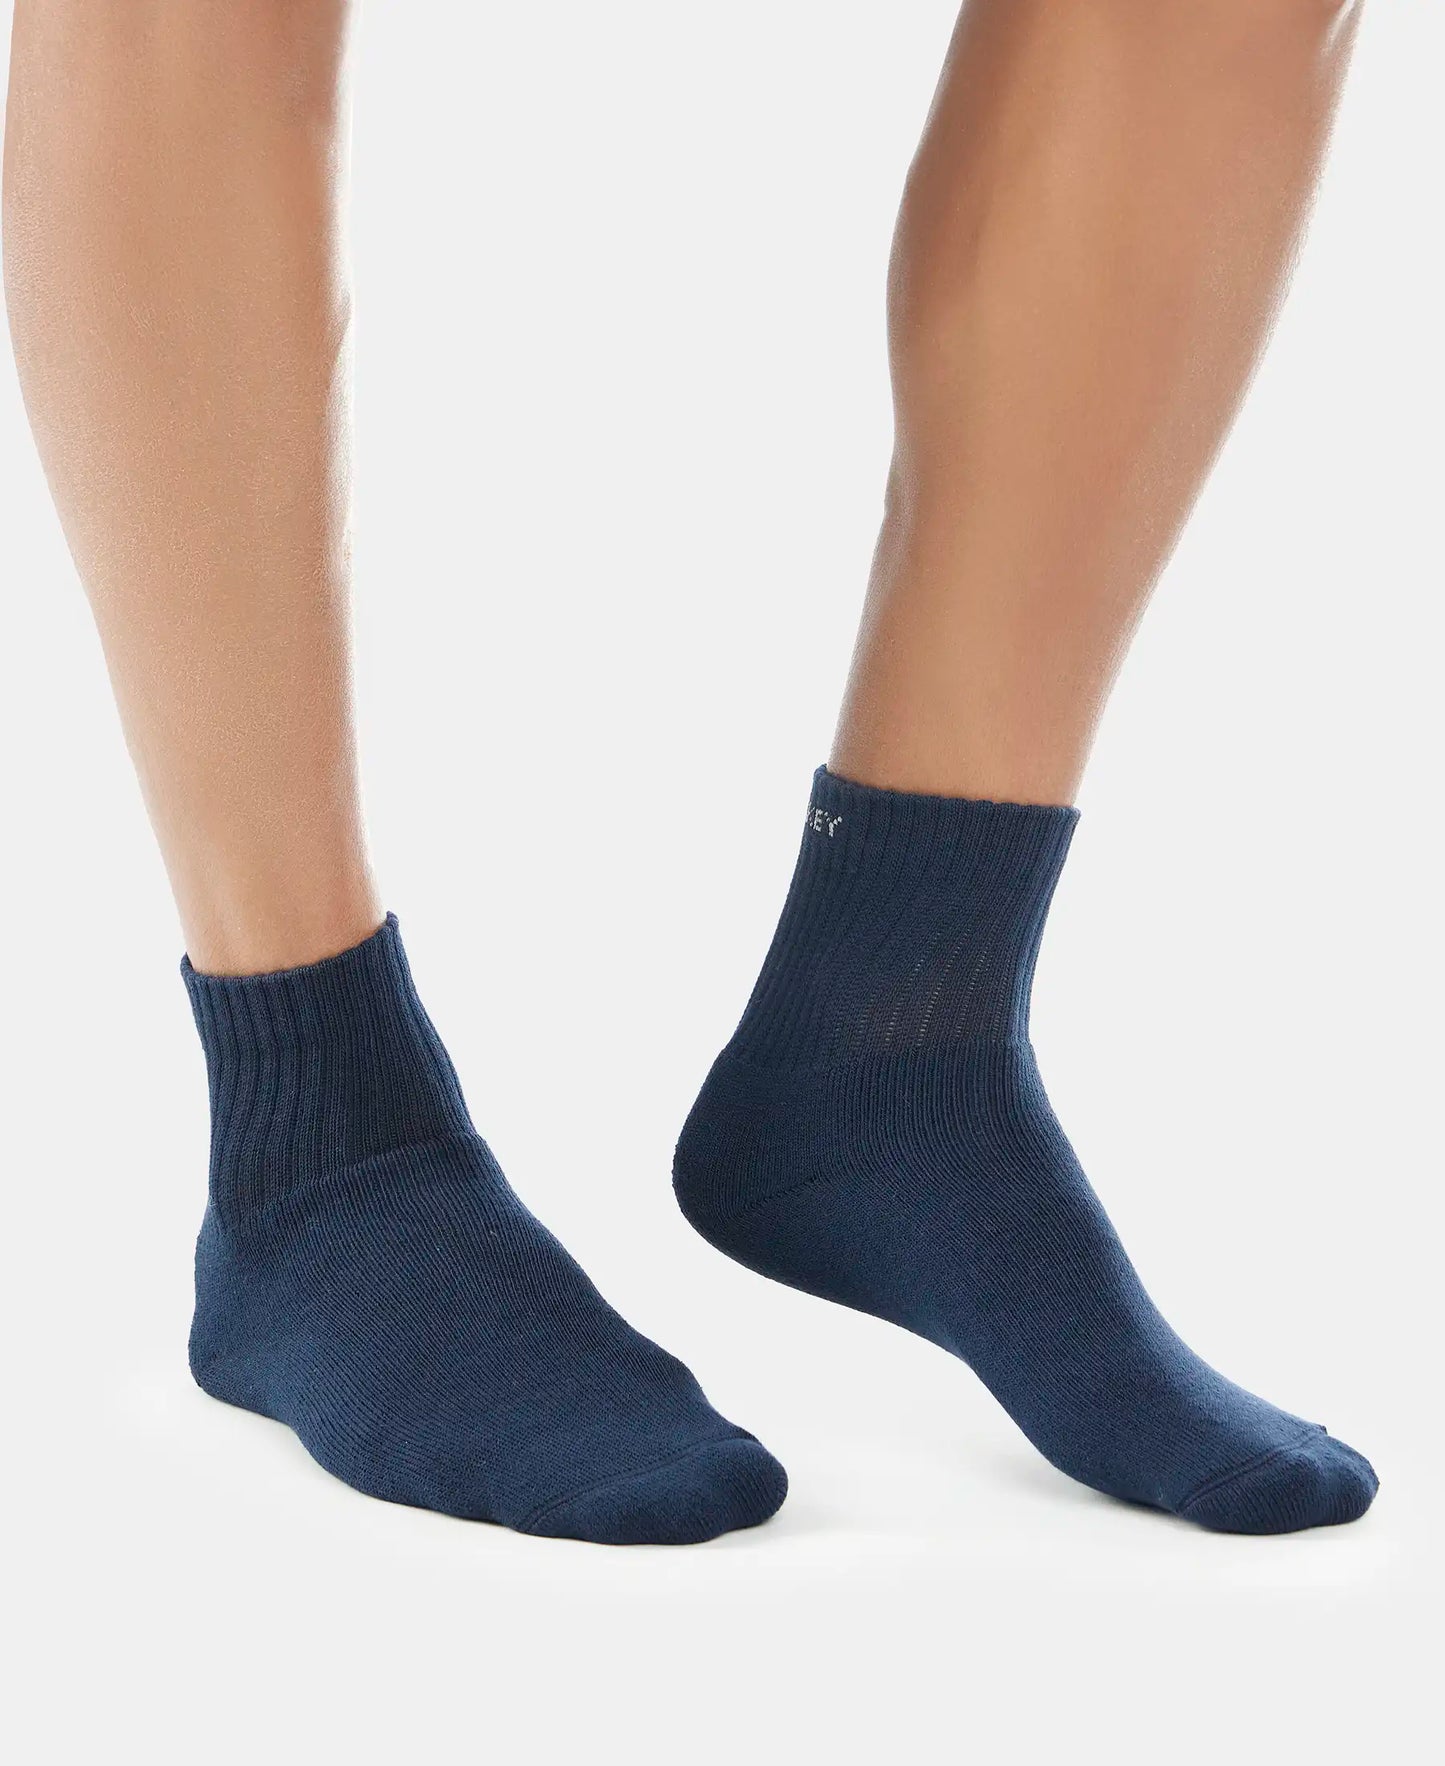 Compact Cotton Terry Ankle Length Socks With StayFresh Treatment - Black/Midgrey Melange/Navy-3